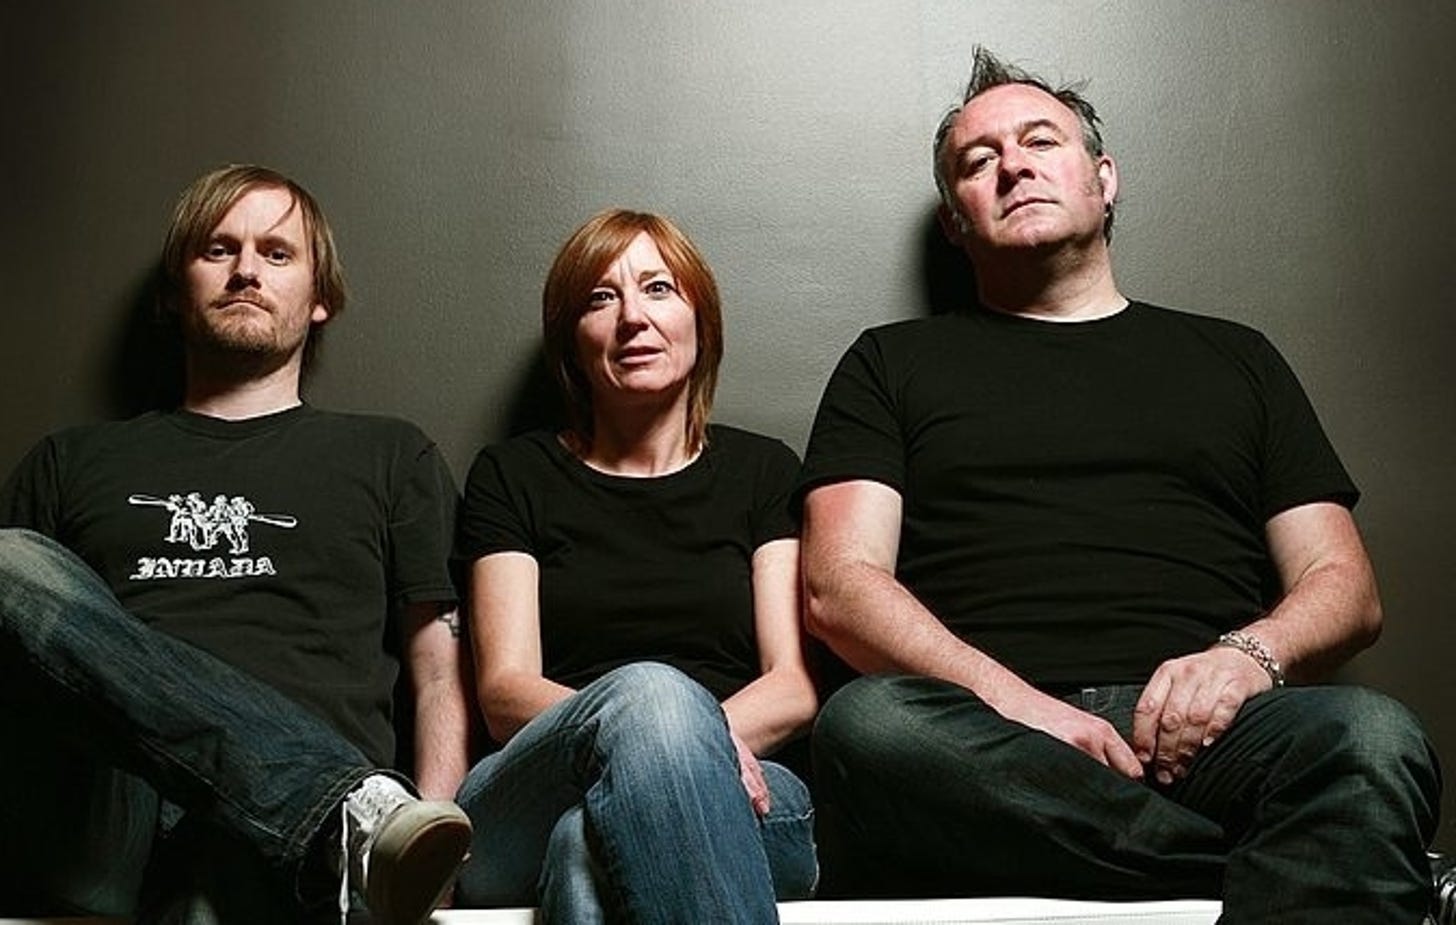 Portishead go digital, uploading their entire musical archive